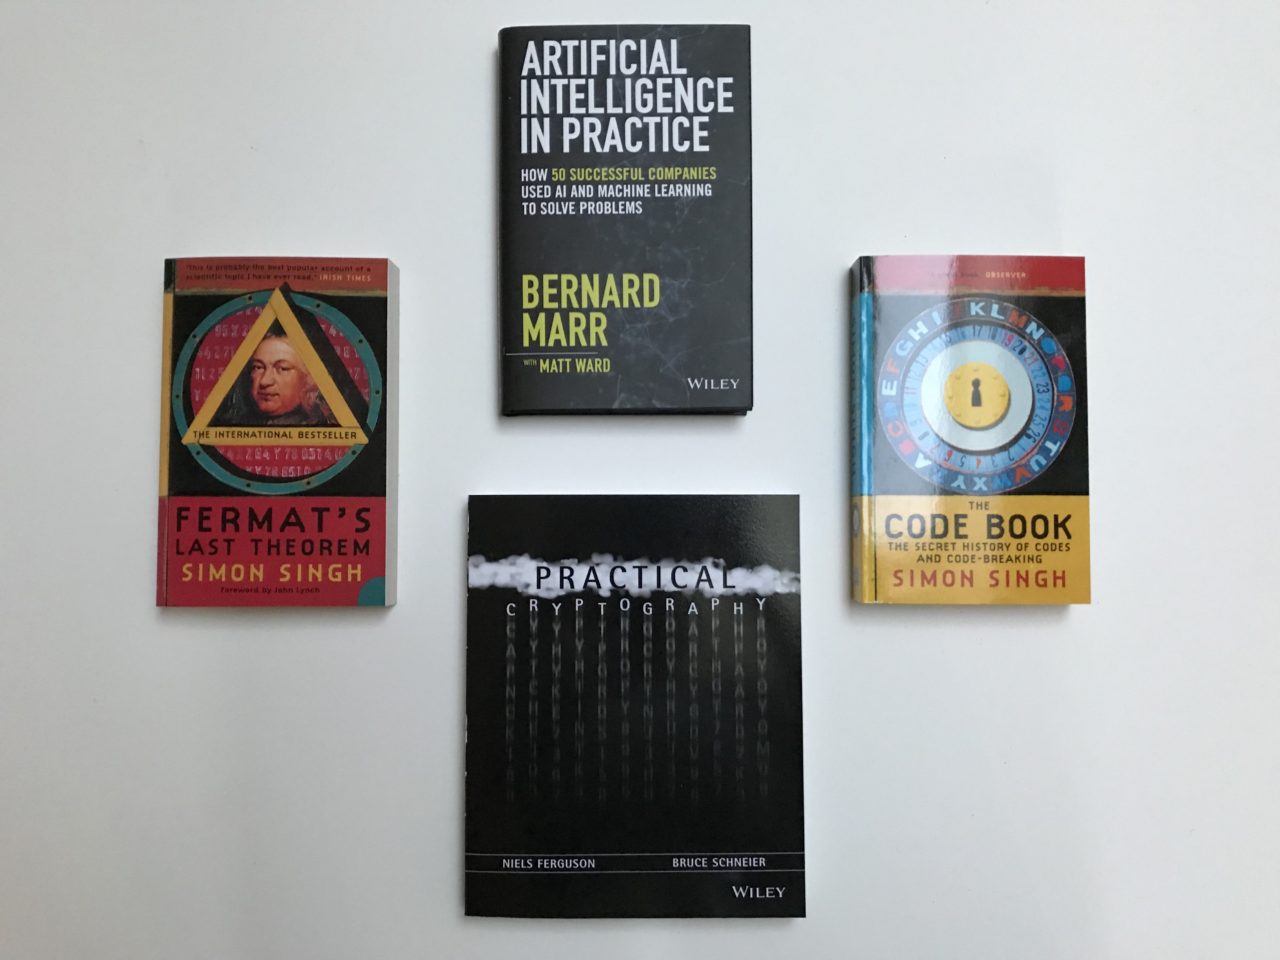 Artificial Intelligence And Cryptography Books On A Table